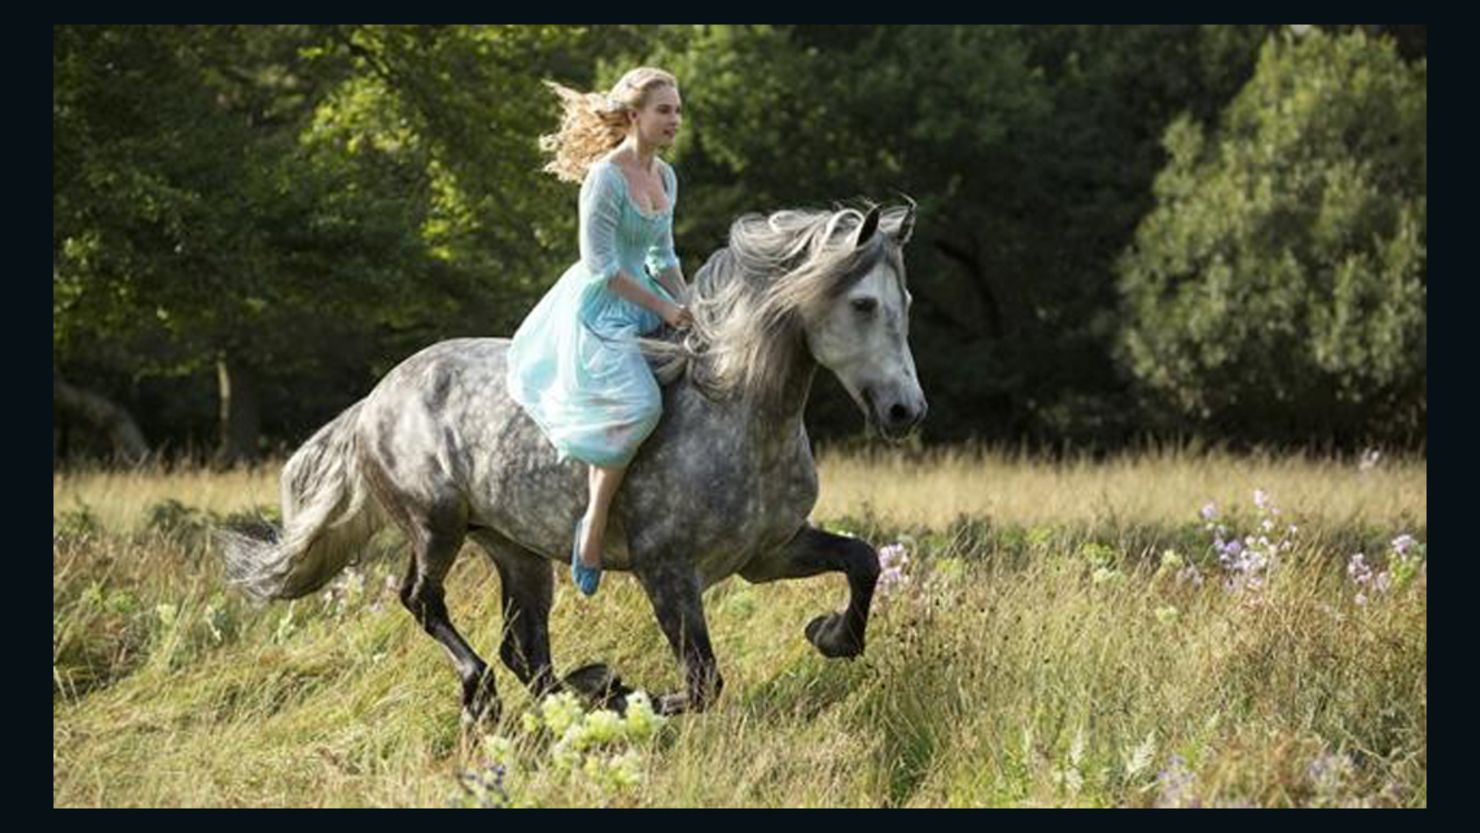 Lily James stars in "Cinderella" as the titular heroine. 